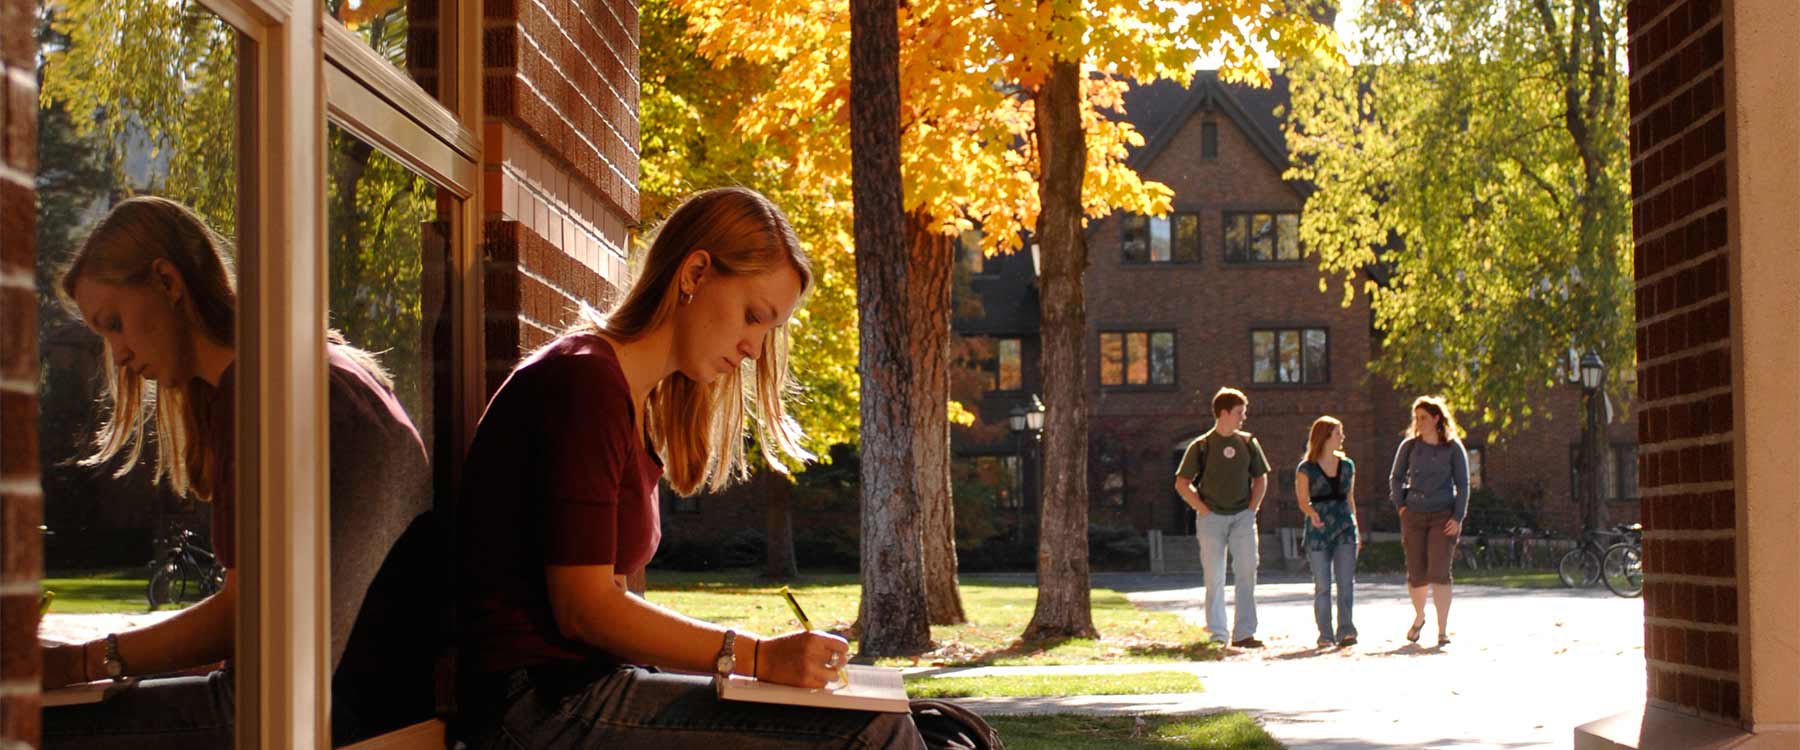 A student sits on a ledge outside an academic building and highlights a textbook. Three students walk toward the building.